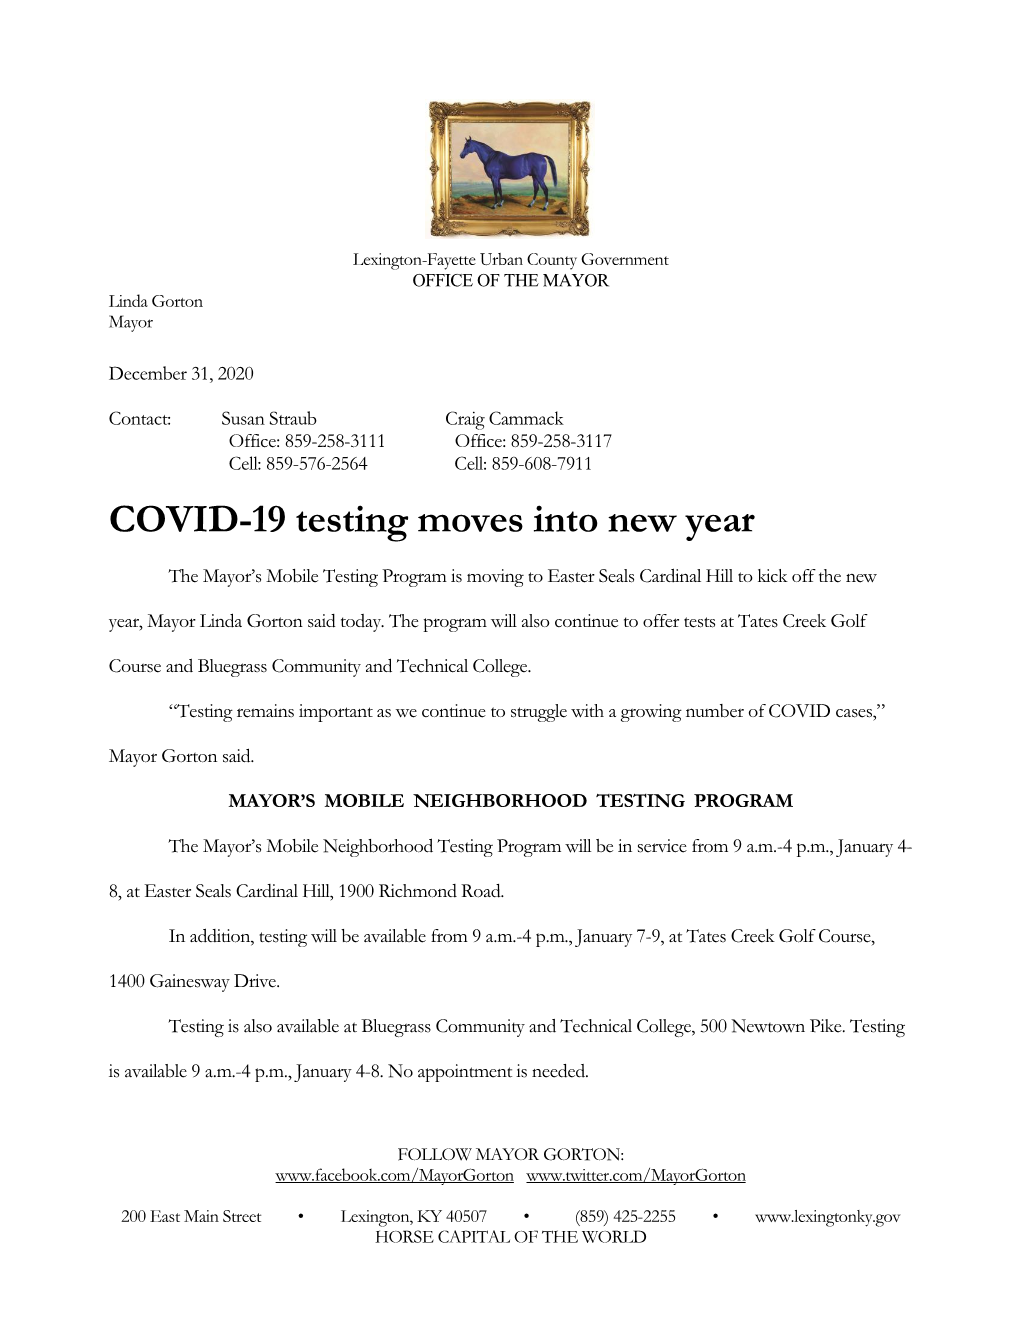 COVID-19 Testing Moves Into New Year